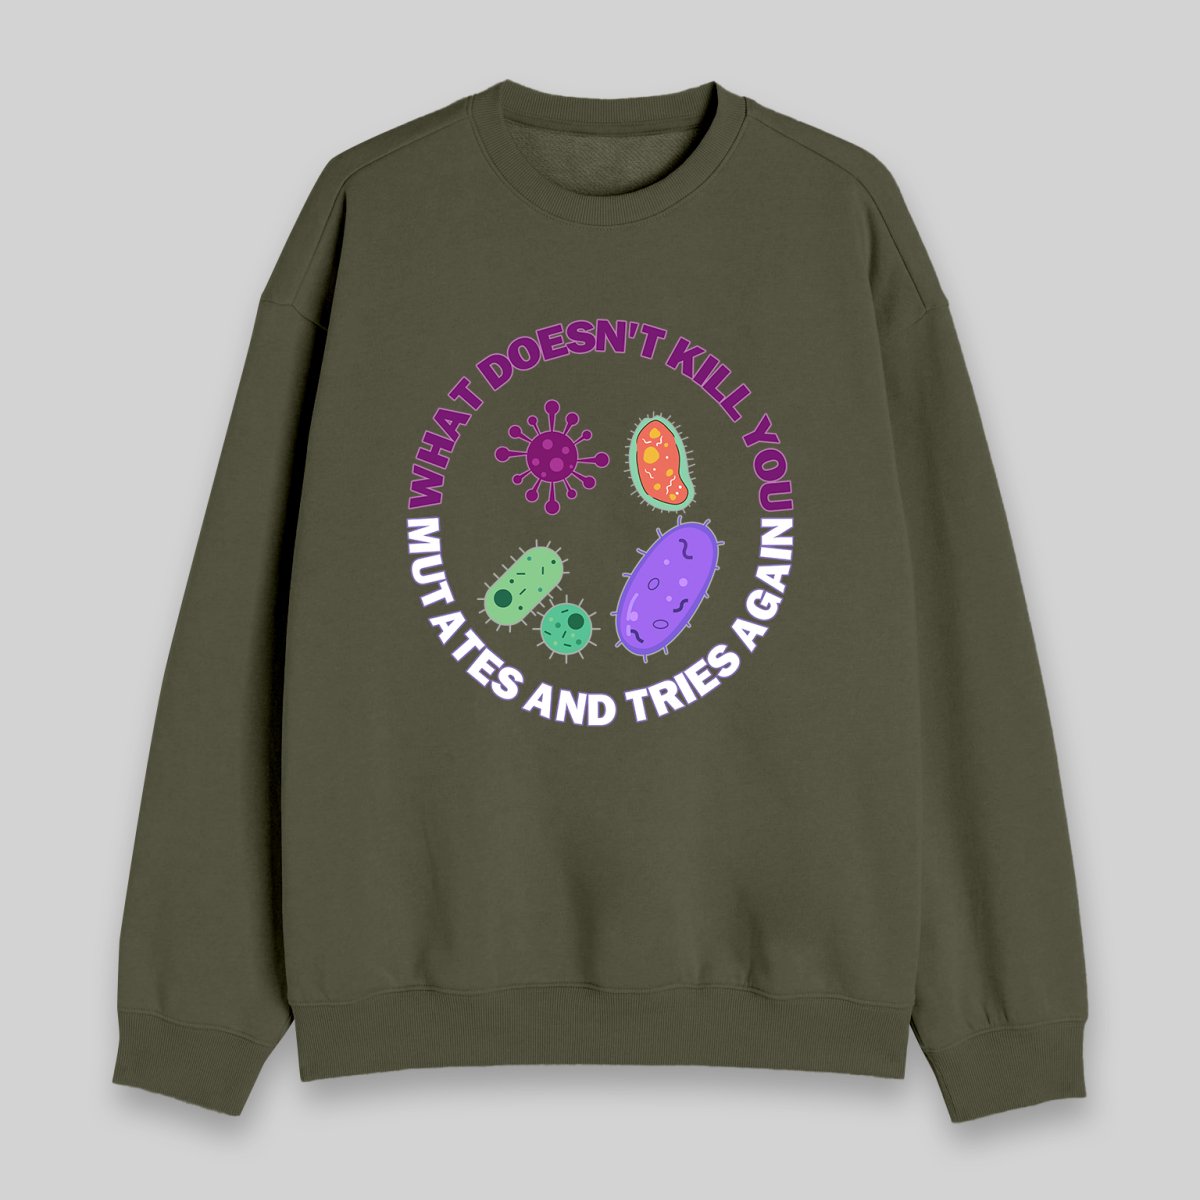 What doesn't kill you mutates and tries again Sweatshirt - Geeksoutfit